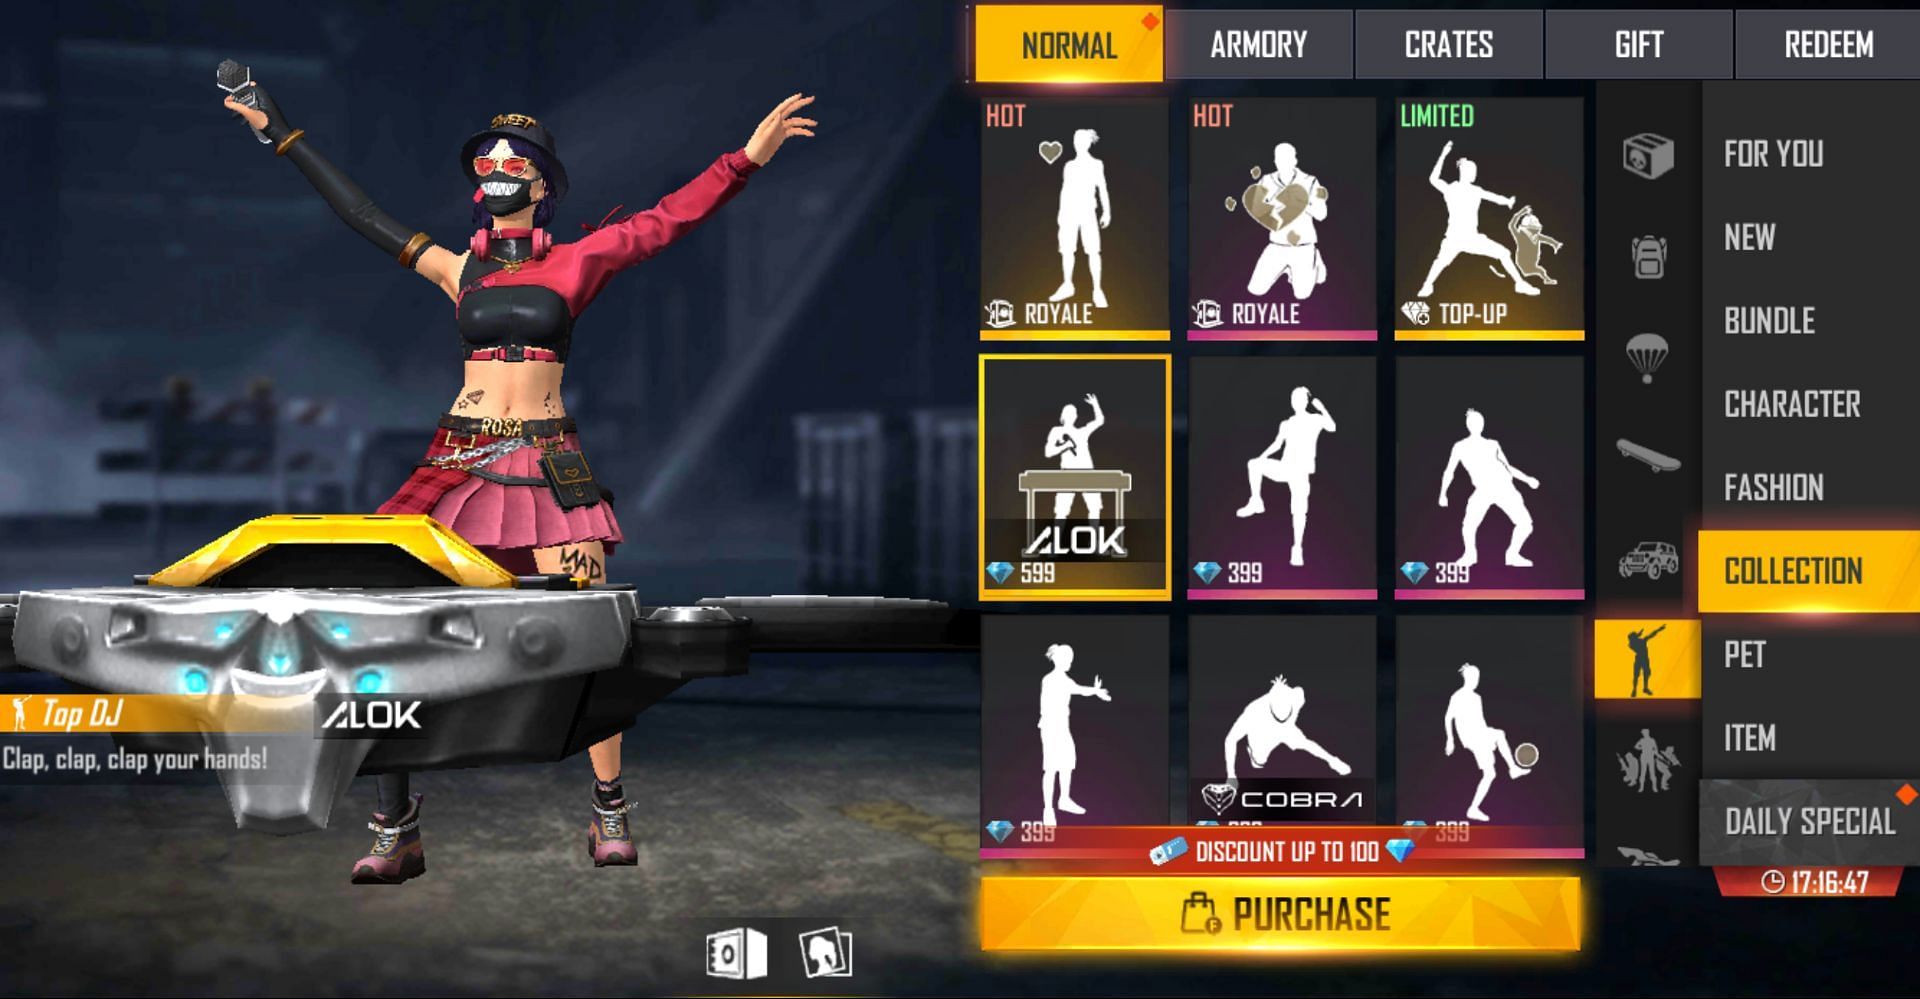 Emotes can be directly purchased through the in-game store as well (Image via Garena)